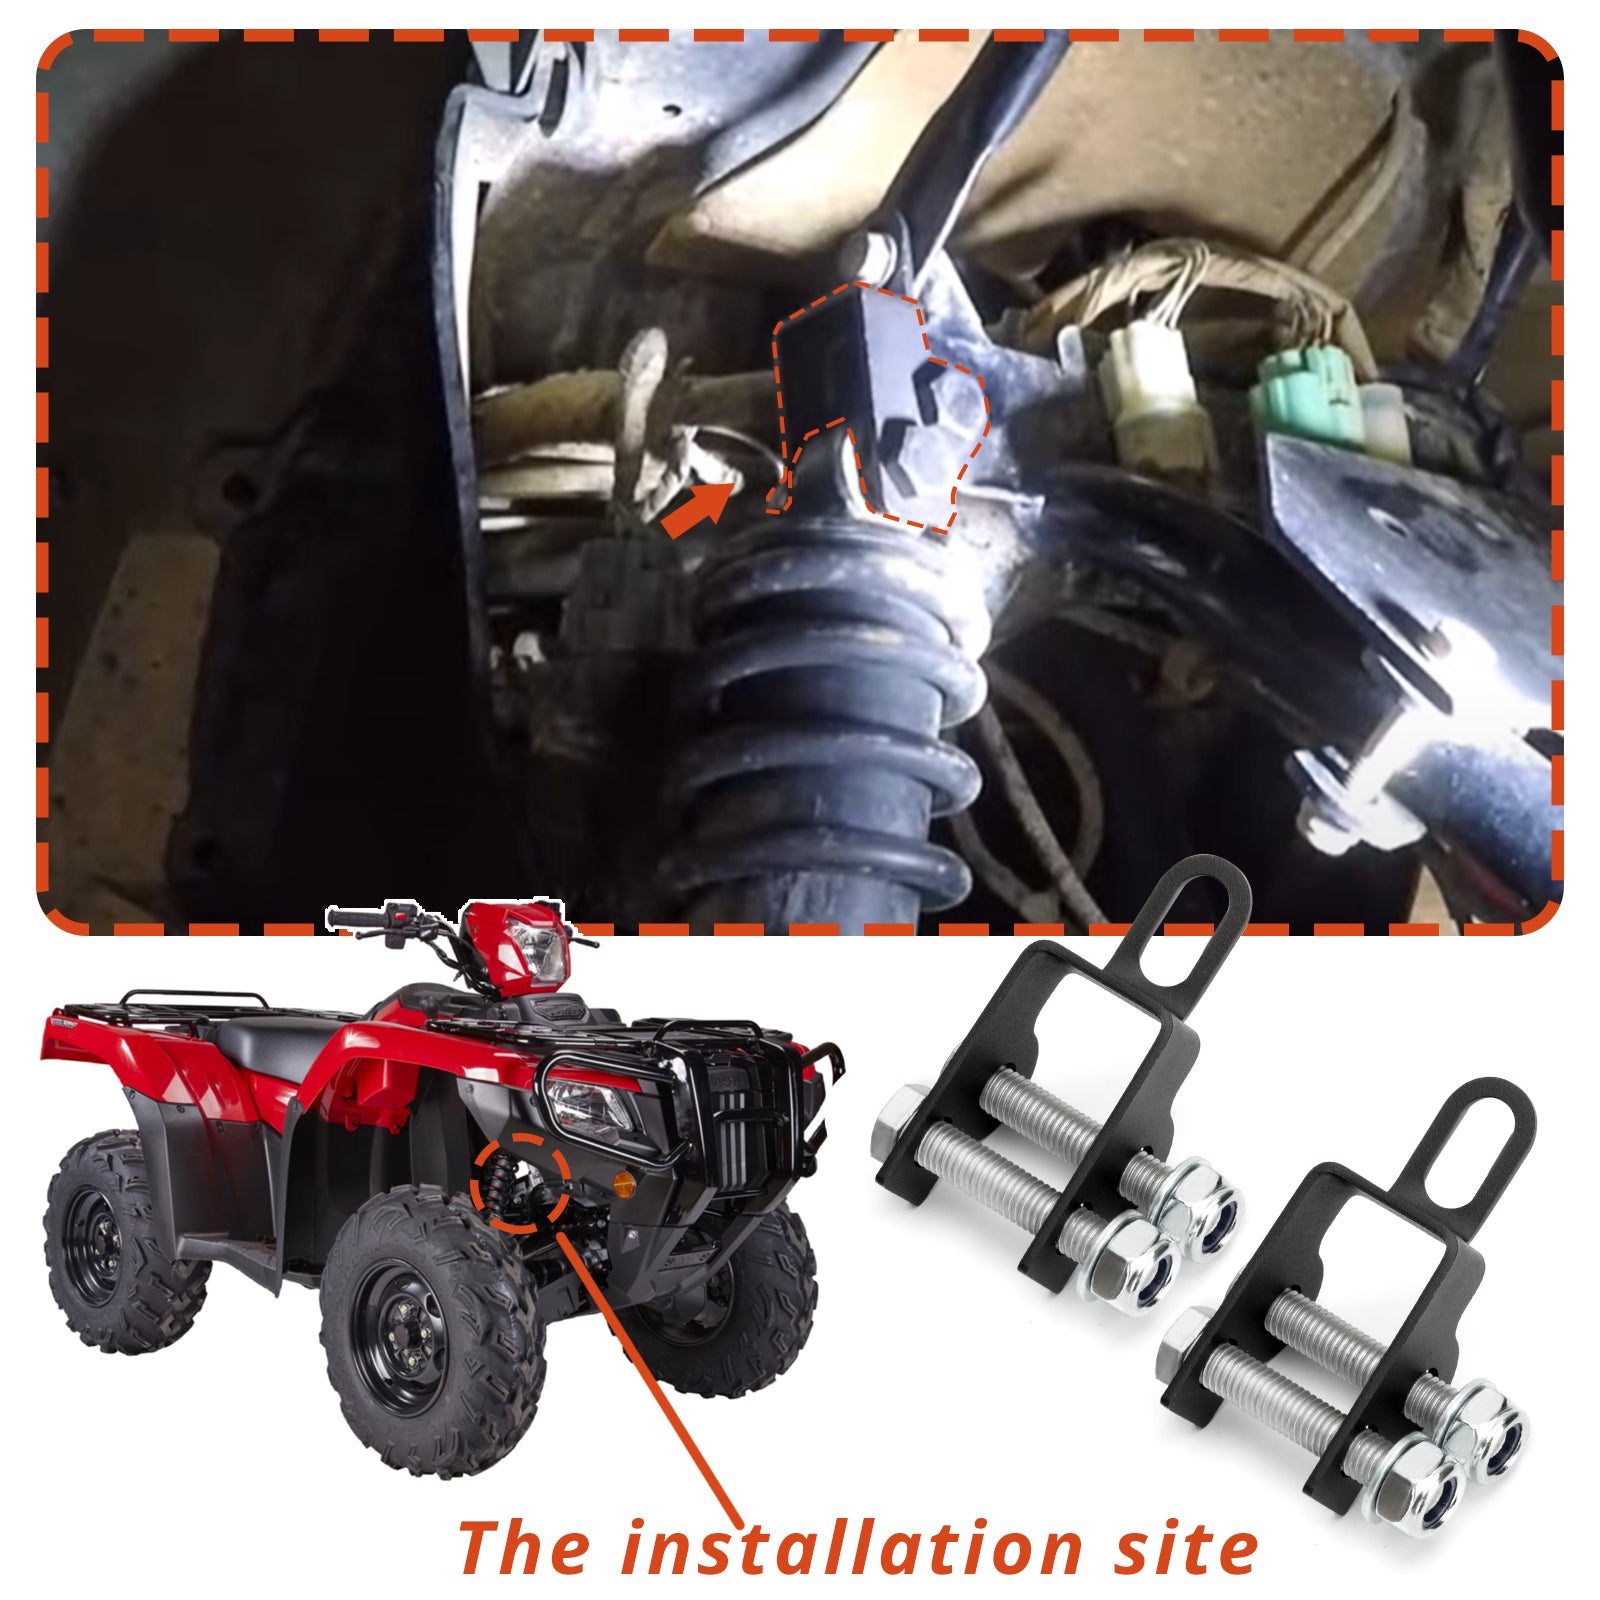 2 inches Full Lift Kits For 1999-2021 Rancher 350 400AT ATV/UTV Suspenison Kits Accessories xccscss.